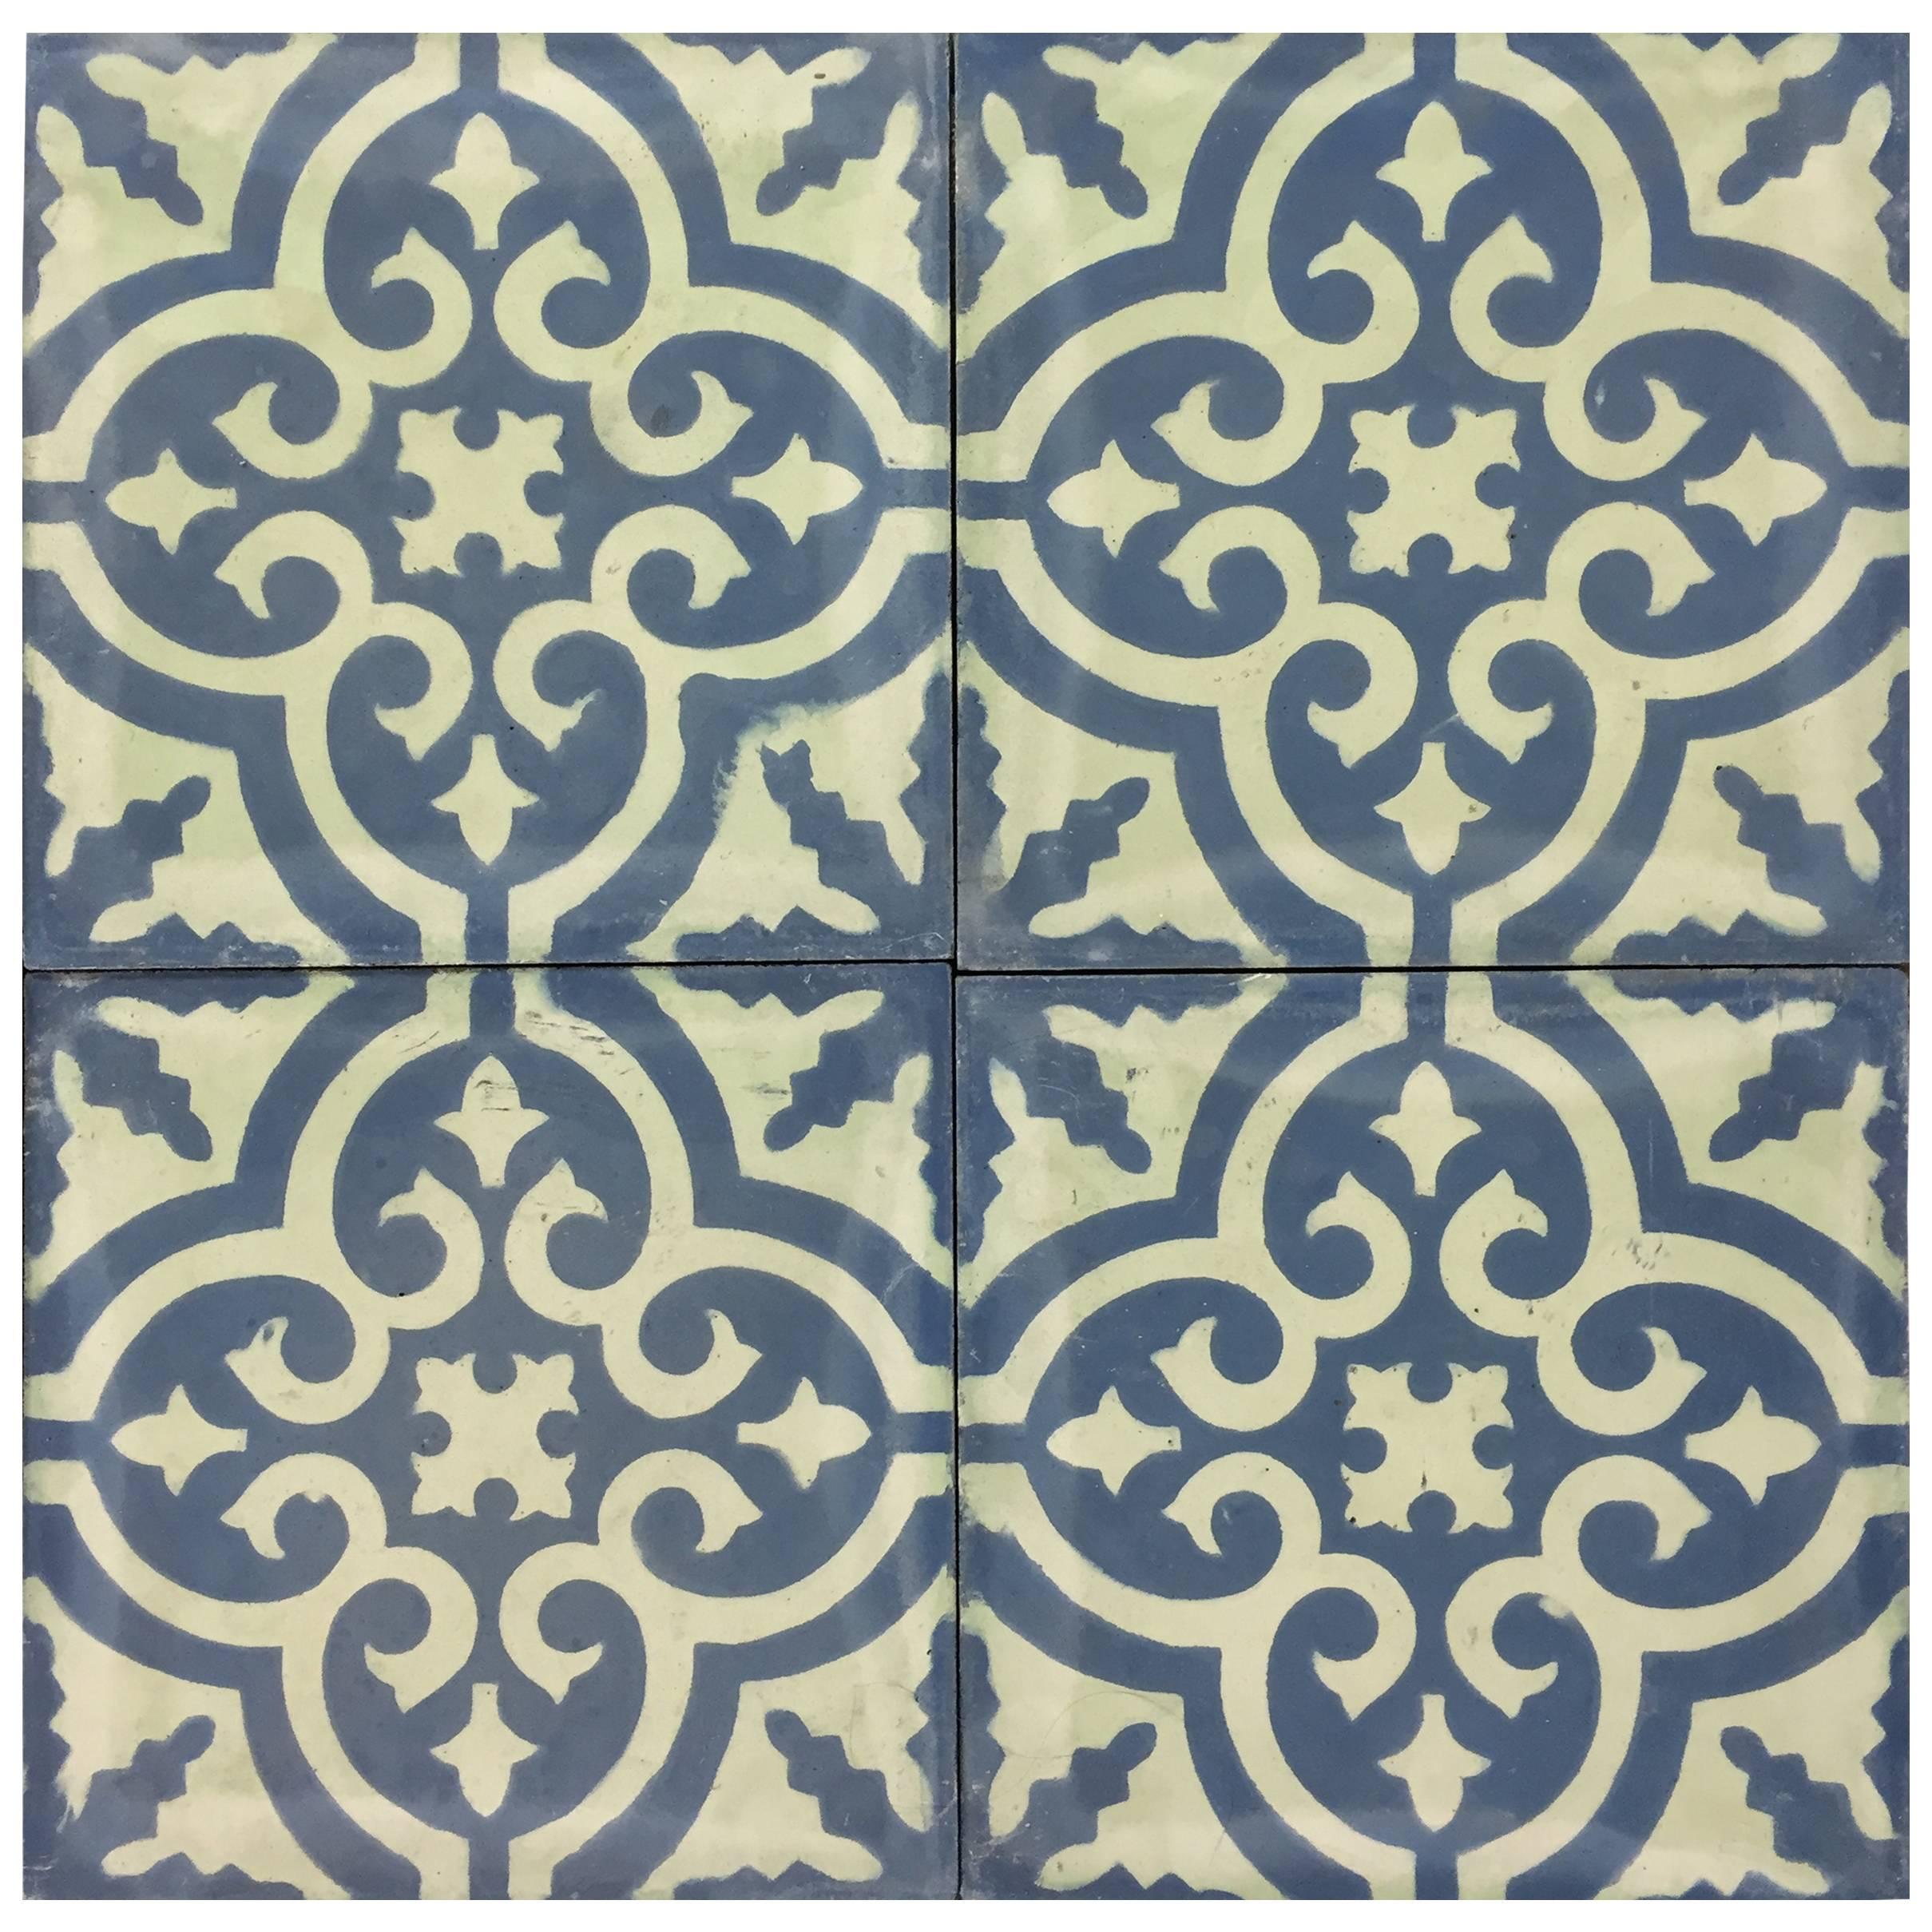 Granada Blue White Cement Tiles Haskell For Sale